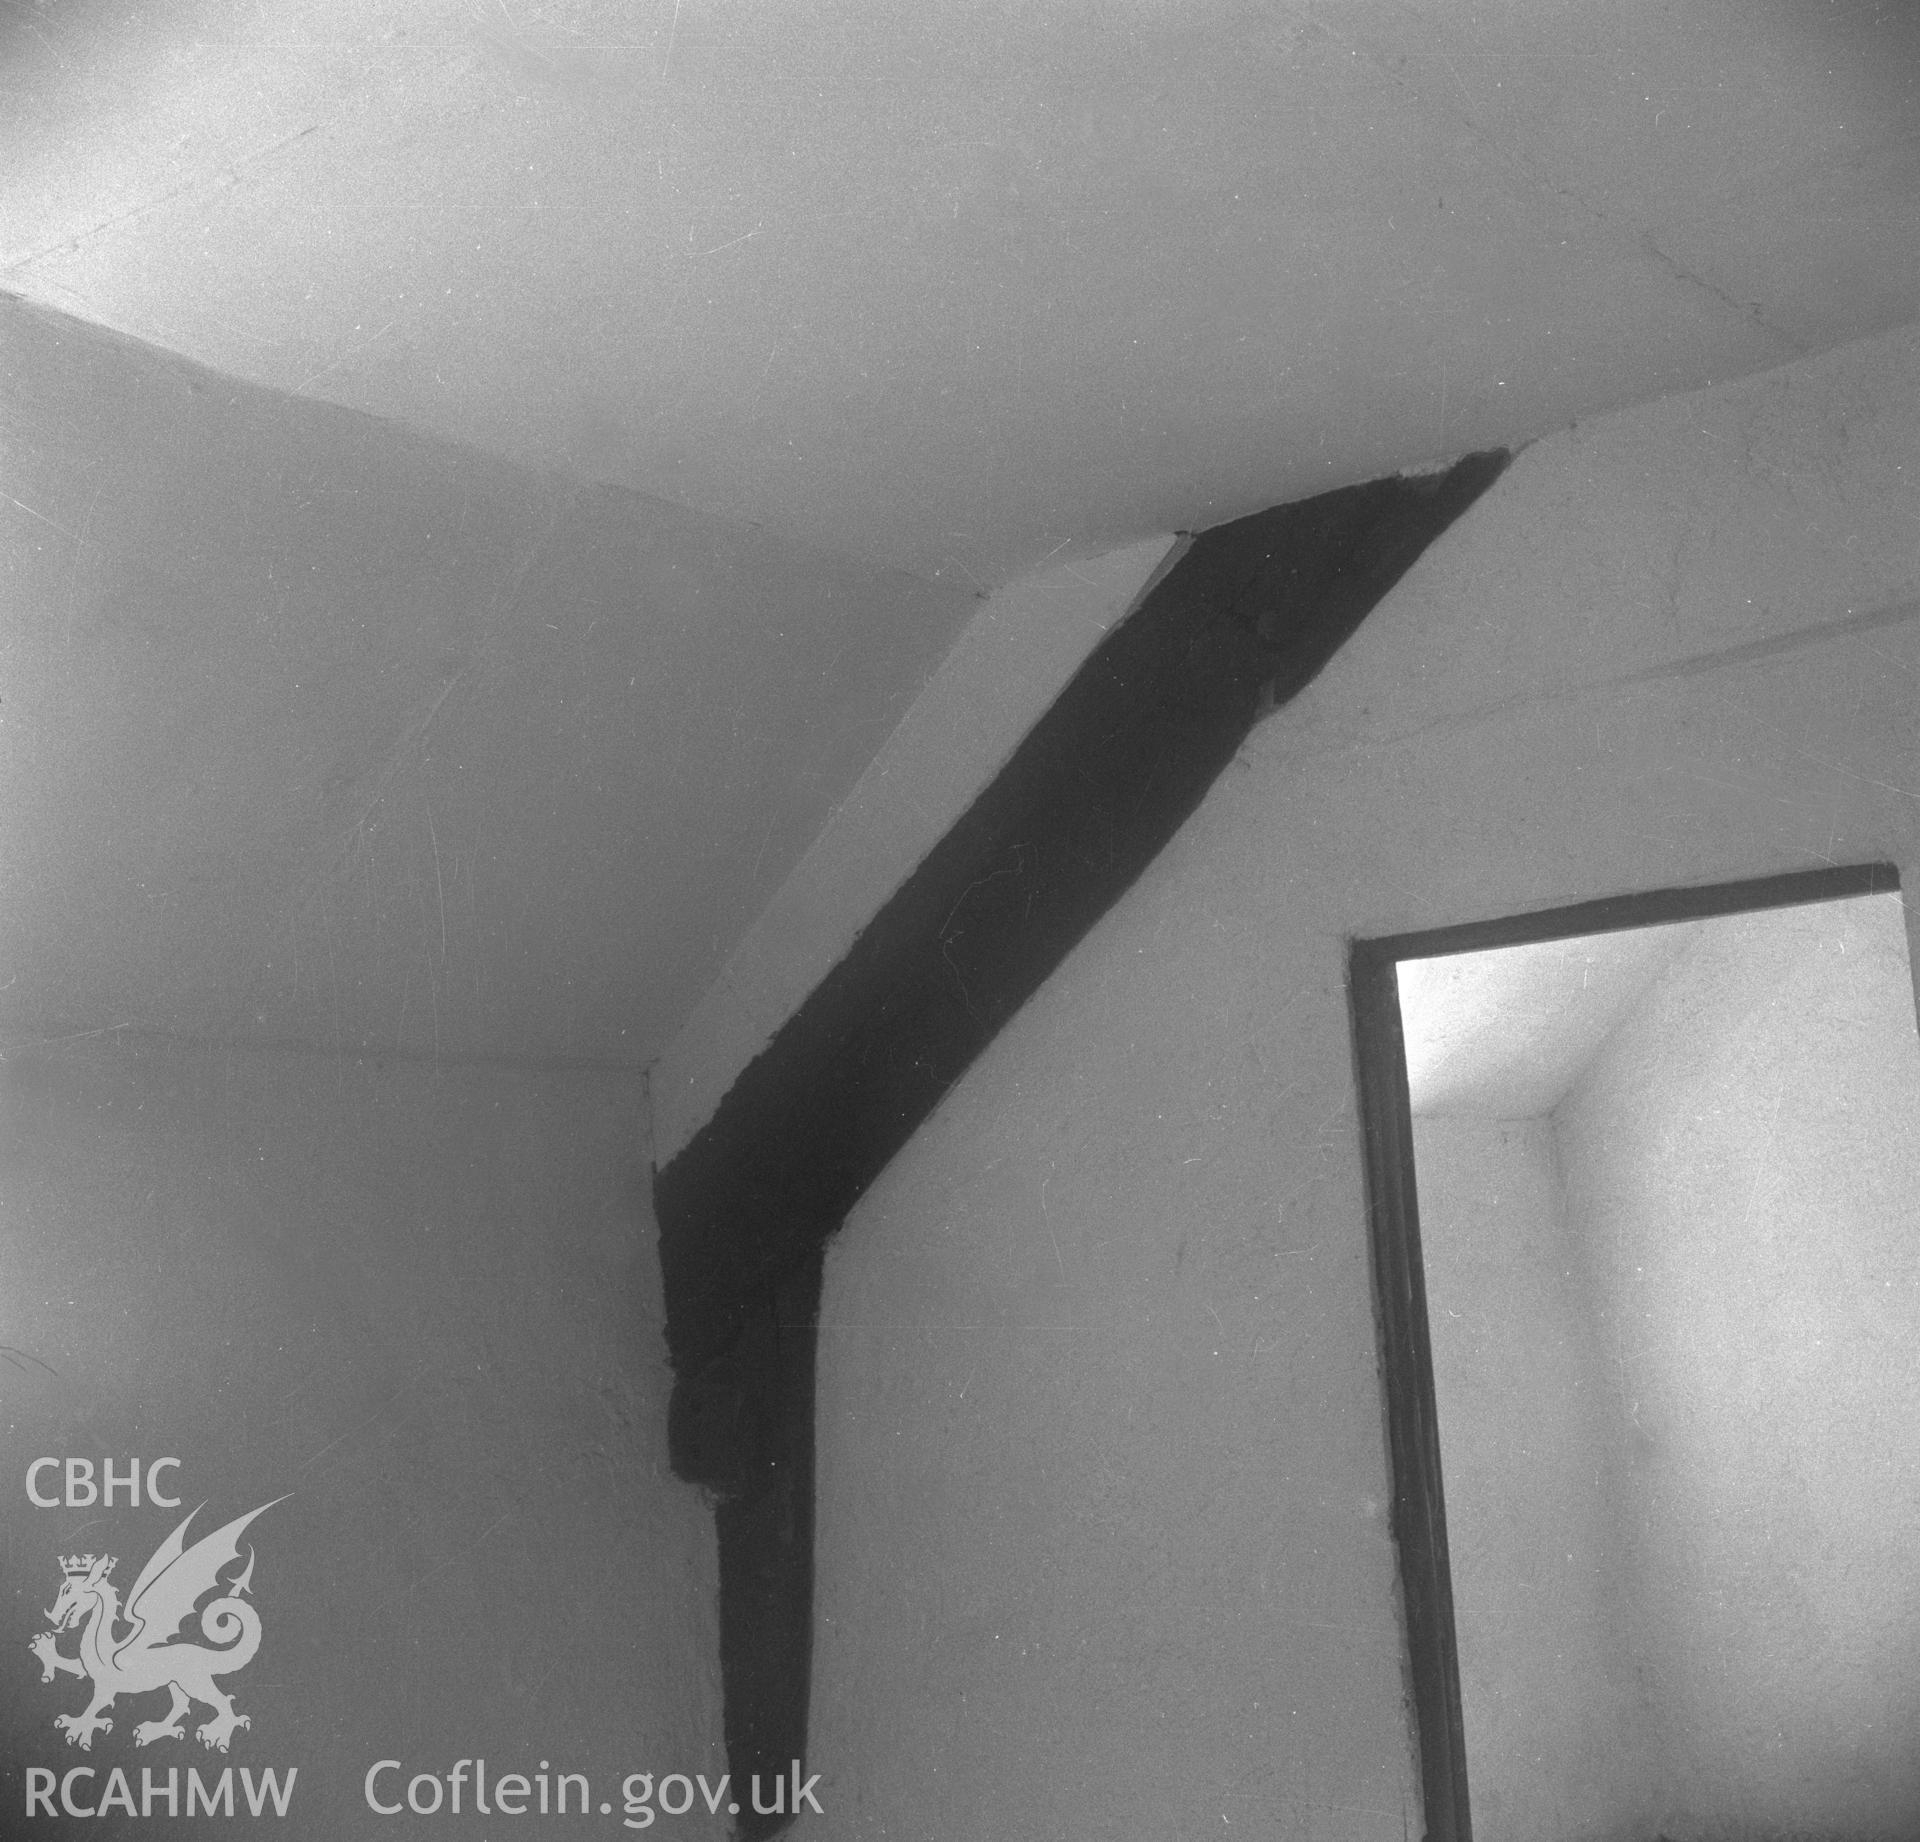 Black and white acetate negative showing interior detail of ceiling beam at Brithdir-Mawr, Cilcain.